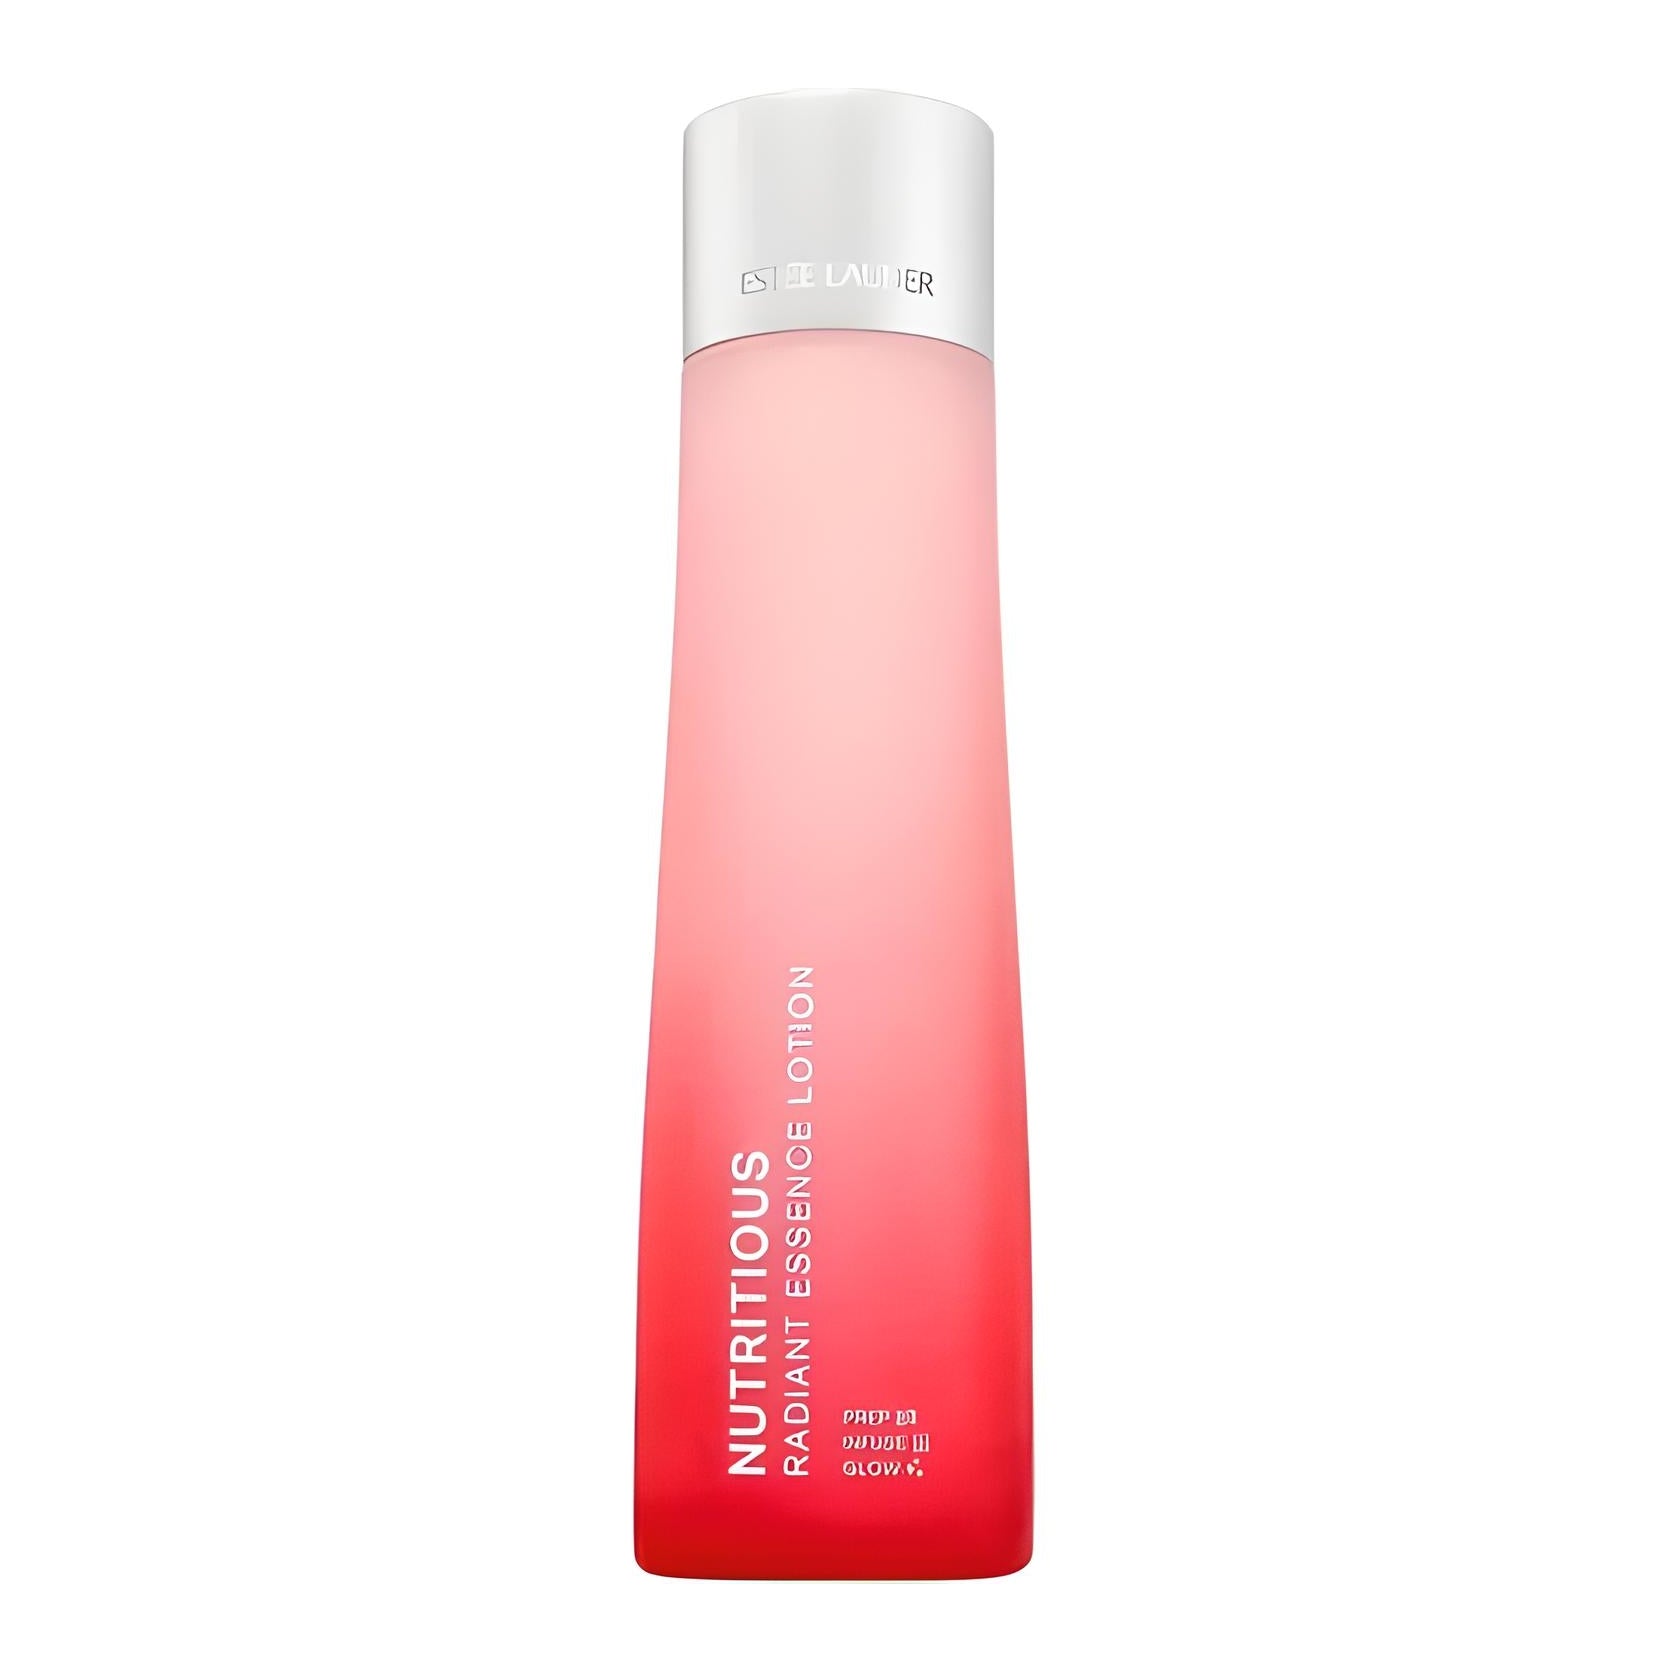 NUTRITIOUS radiant essence lotion